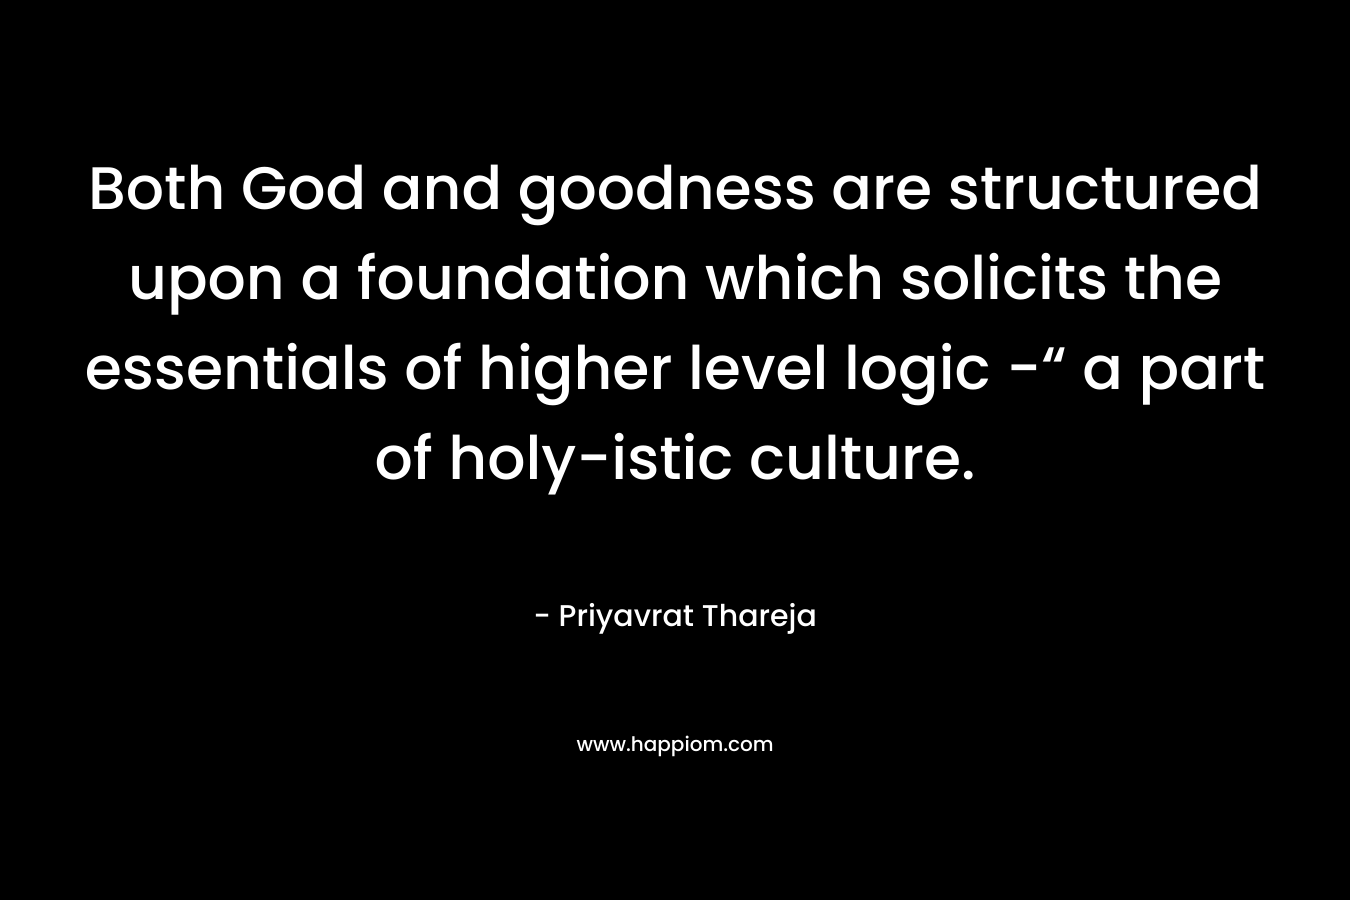 Both God and goodness are structured upon a foundation which solicits the essentials of higher level logic -“ a part of holy-istic culture. – Priyavrat Thareja